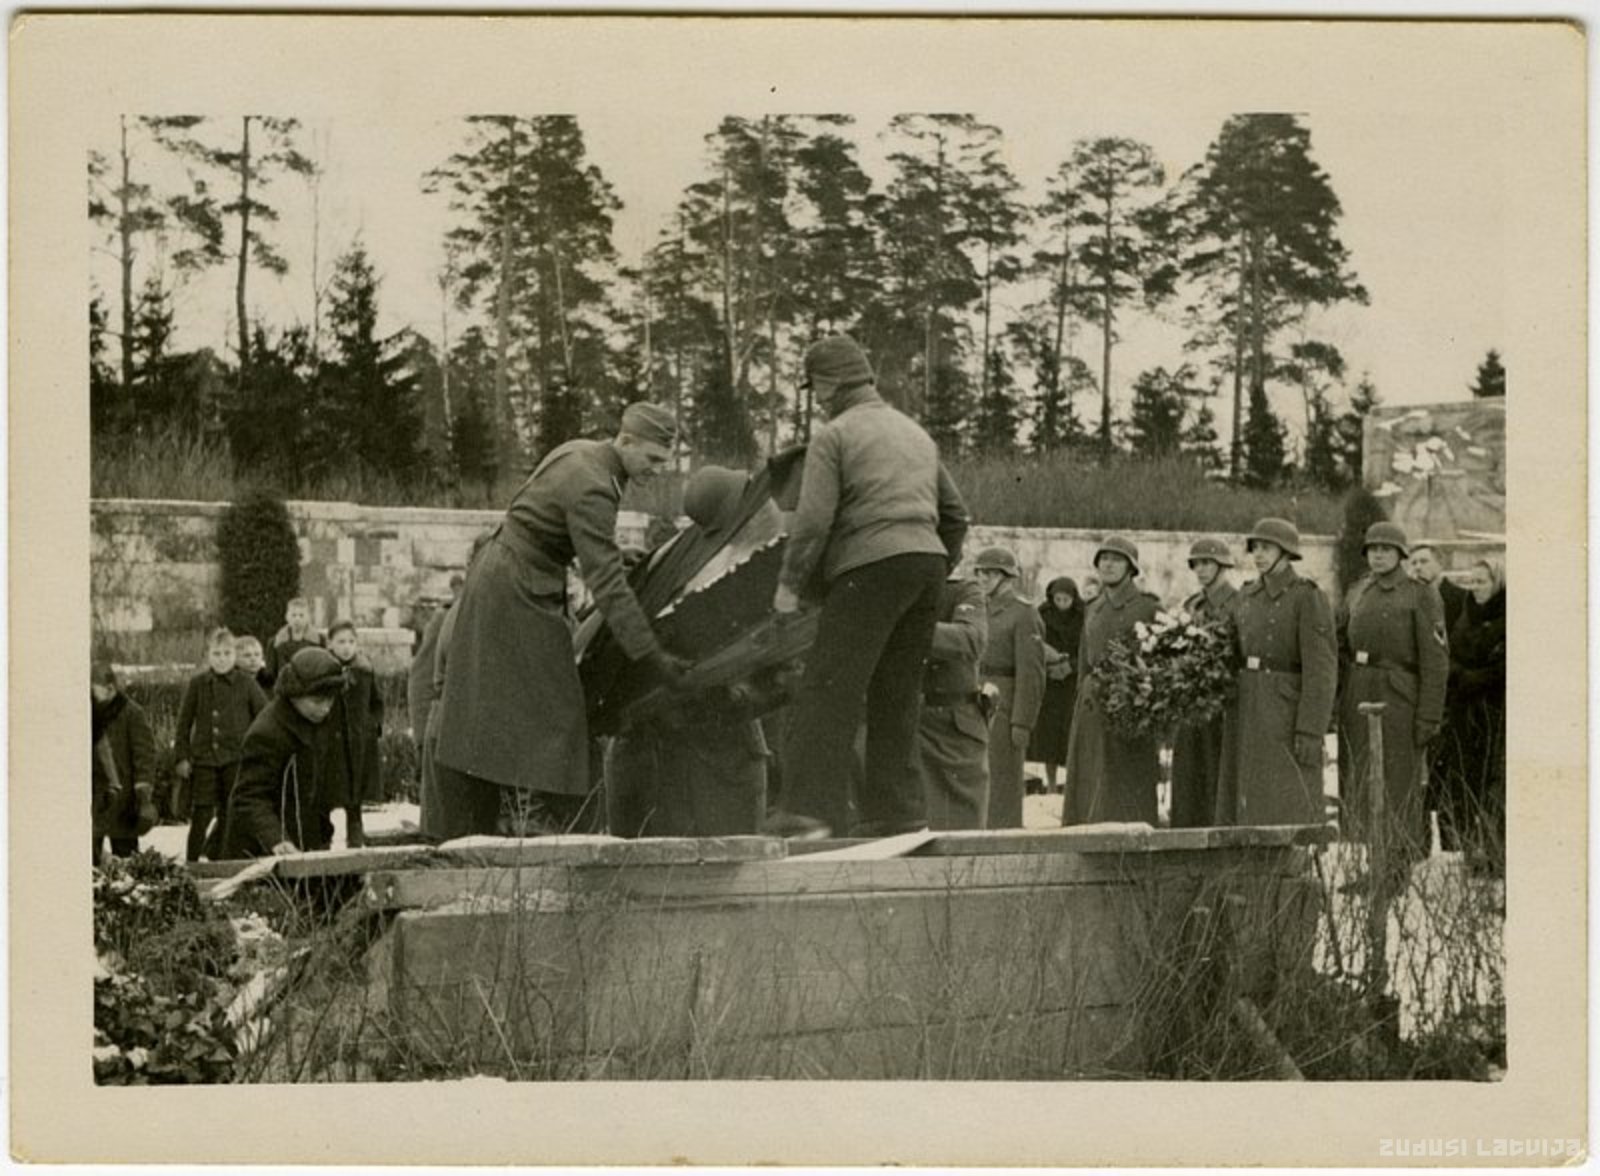 Riga. Burial of a fallen soldier in the Brothers' Graves